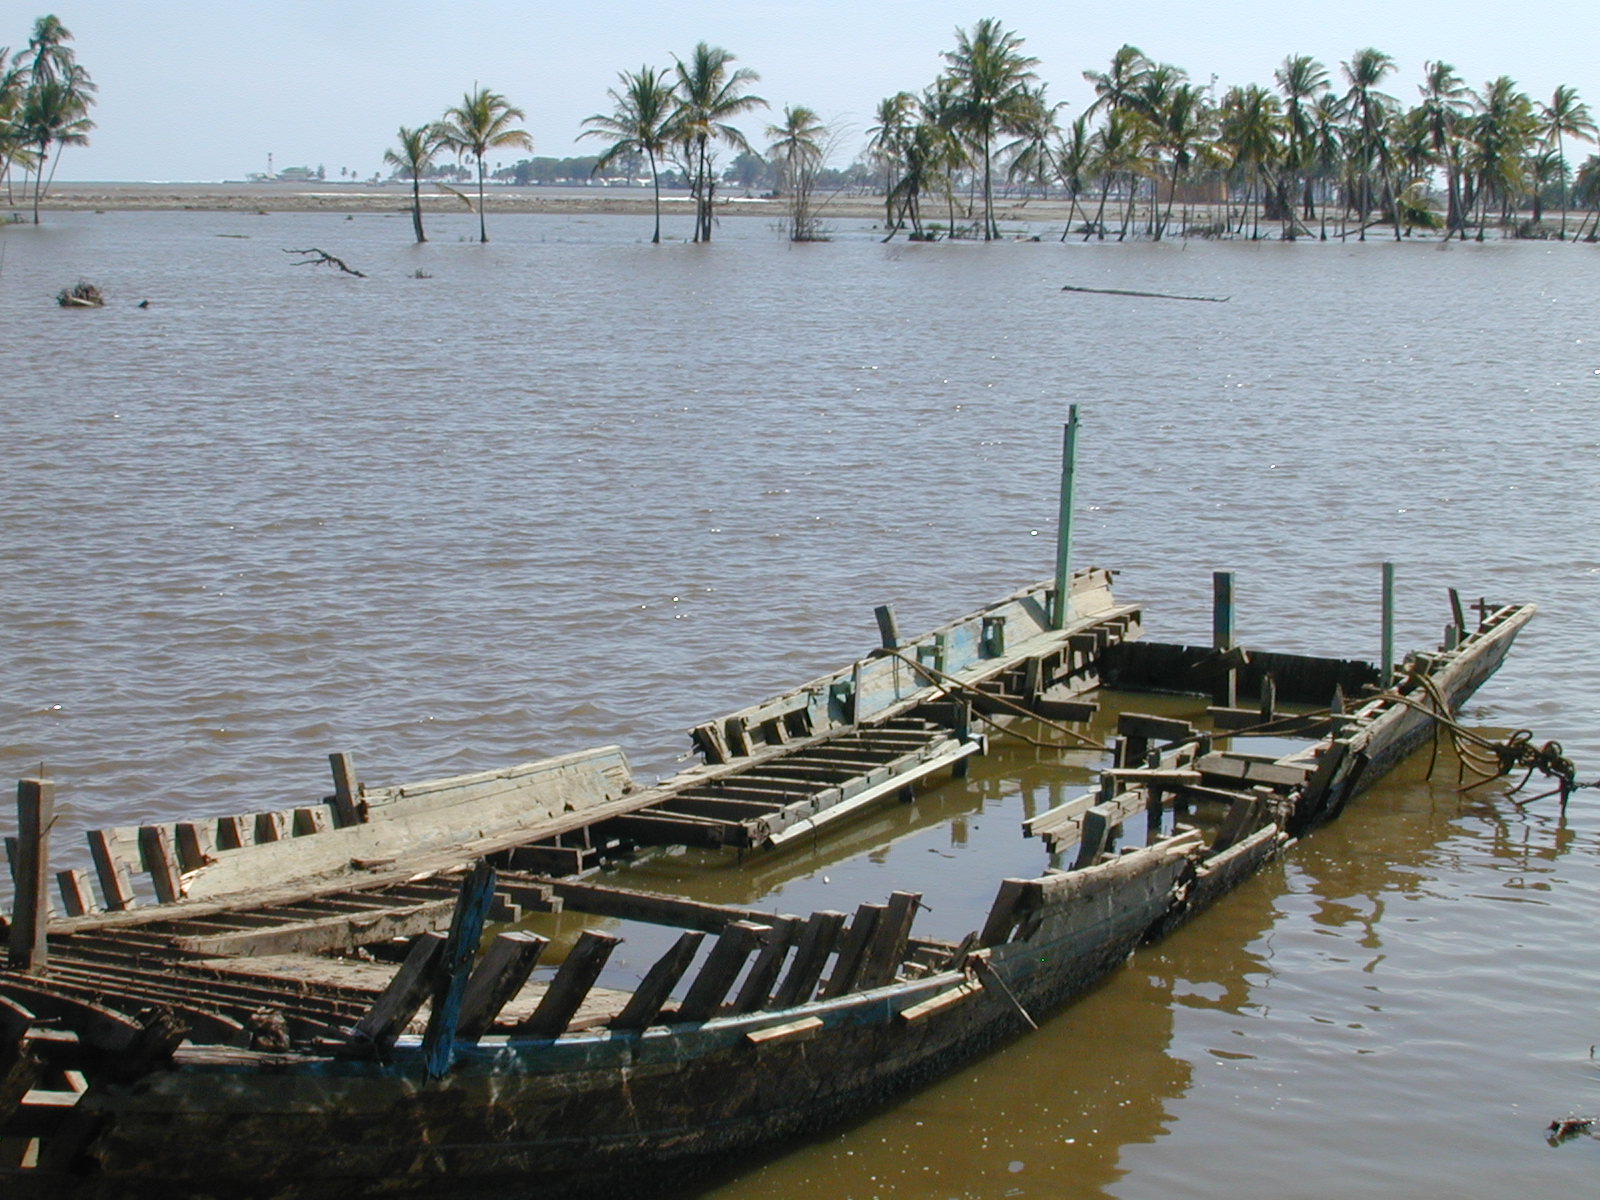 Meulaboh is an active fishing port on a river. At the mouth of the 